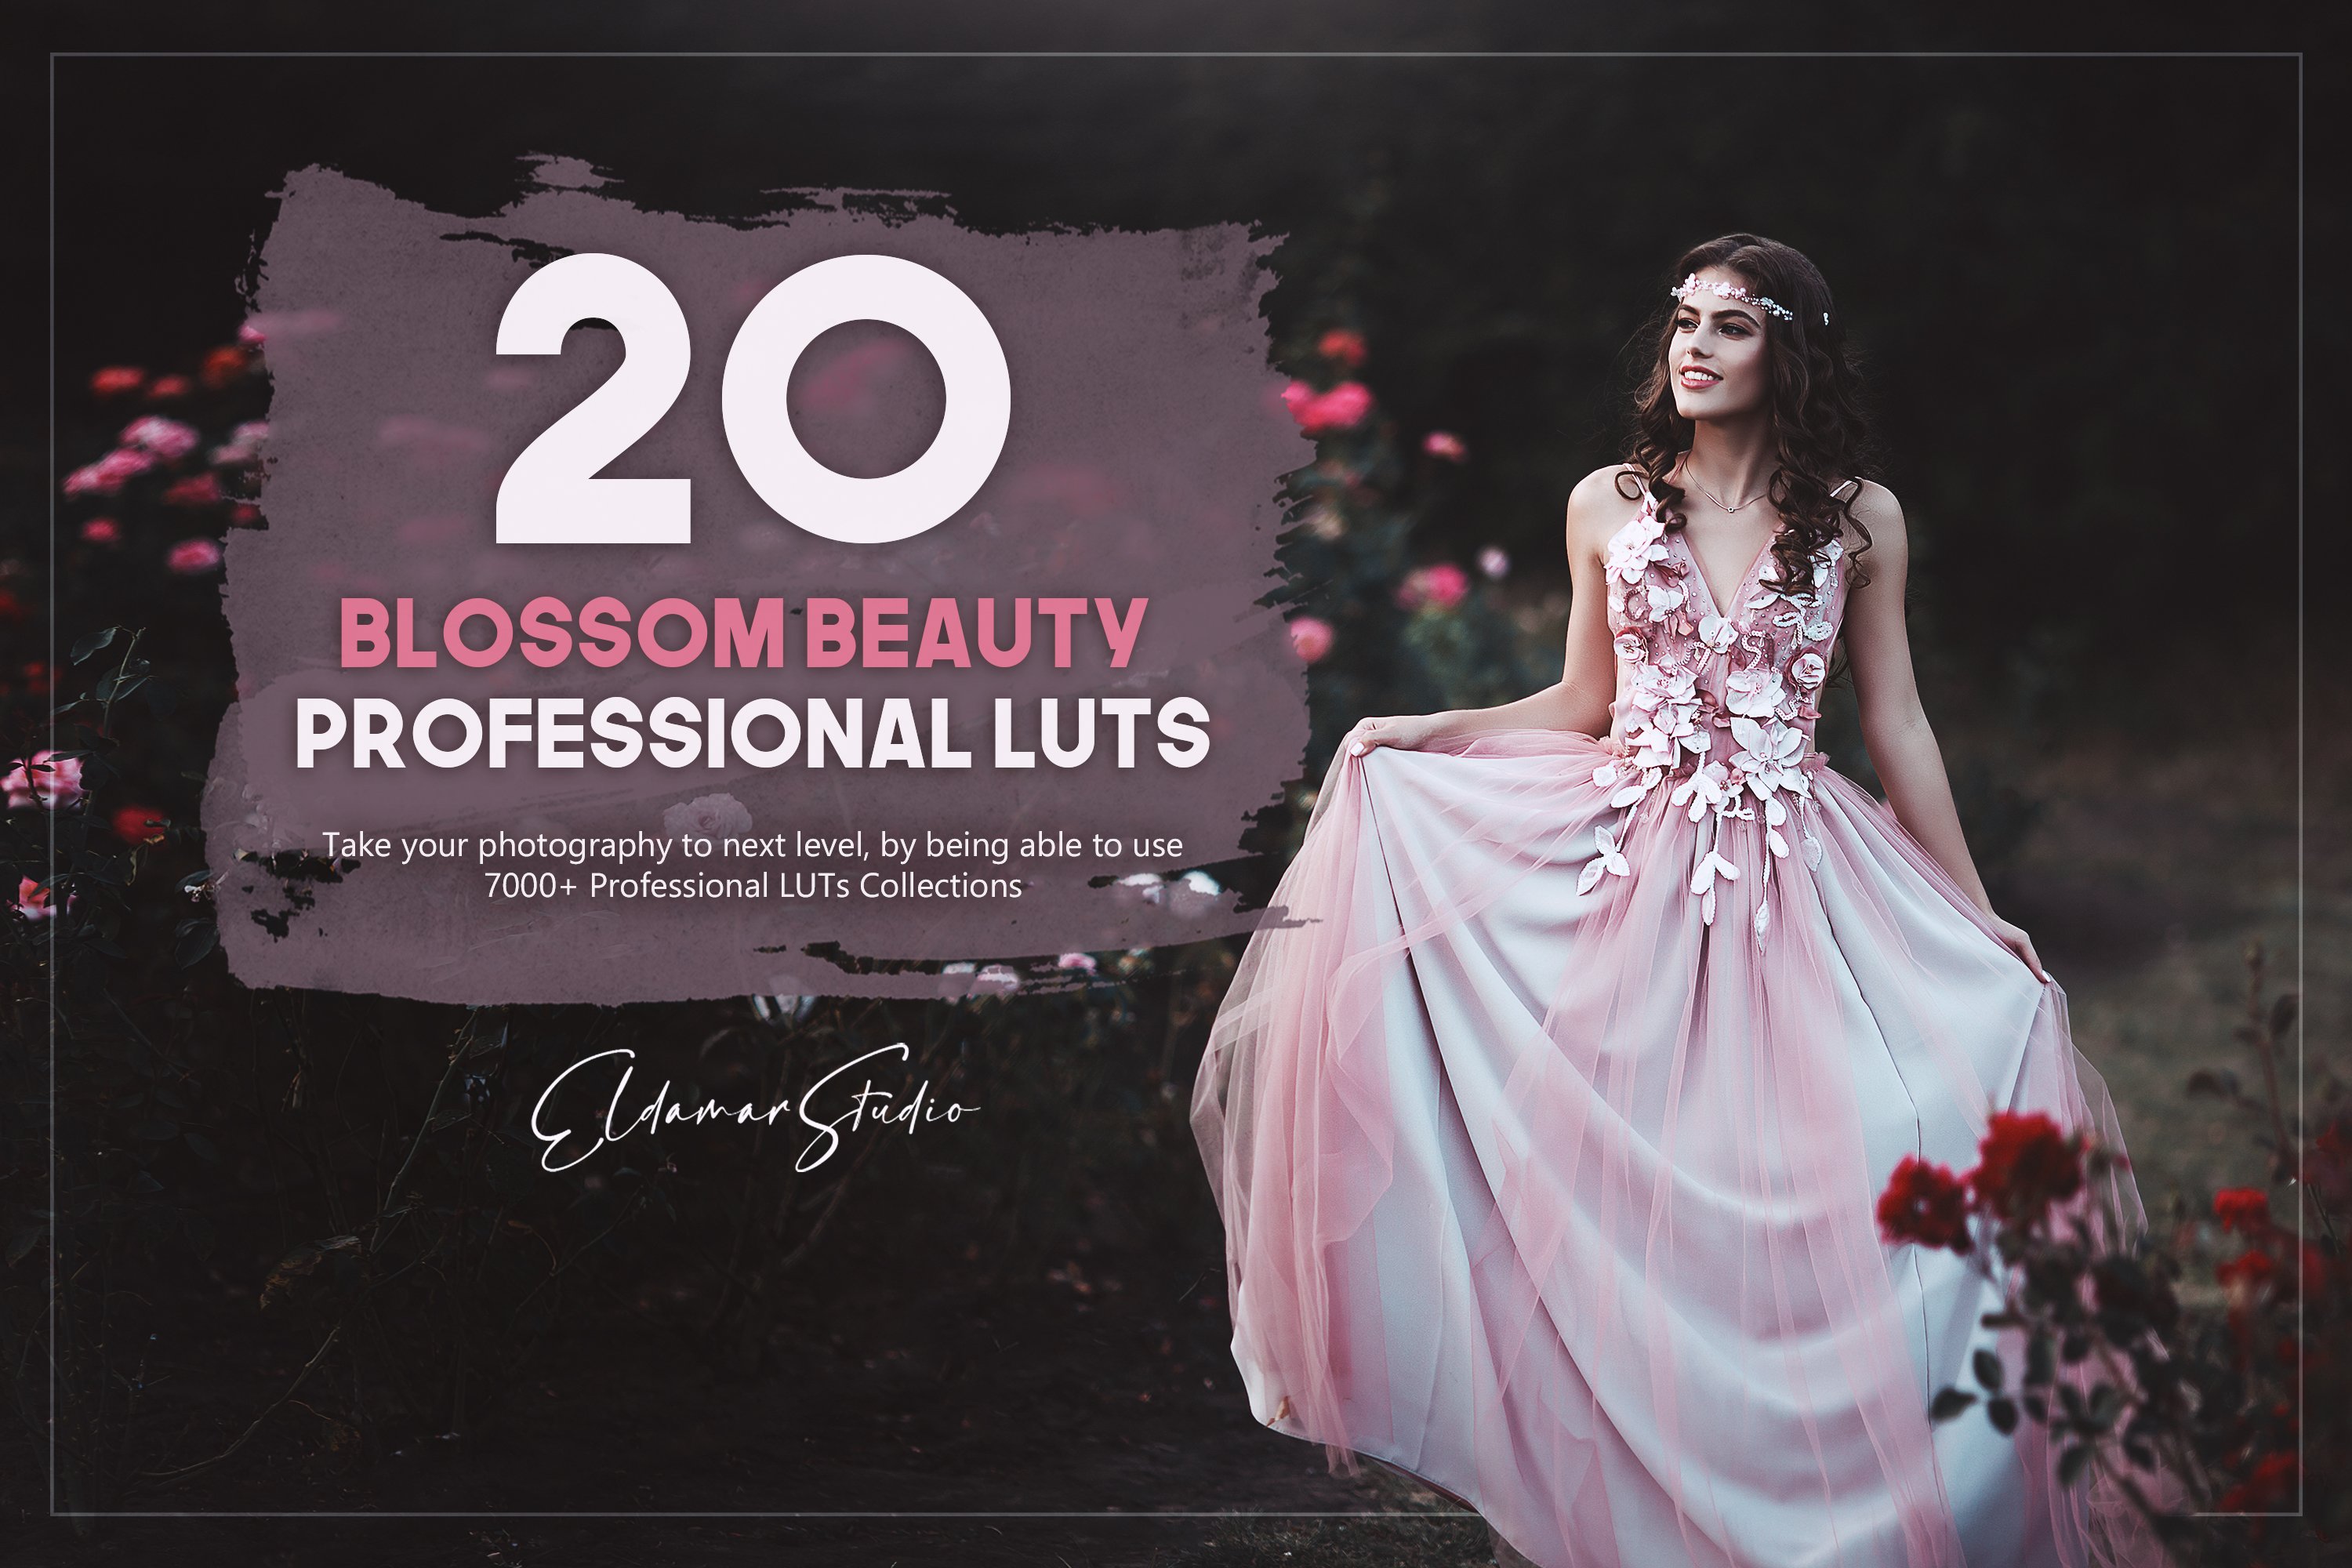 20 Blossom Beauty LUTs Packcover image.